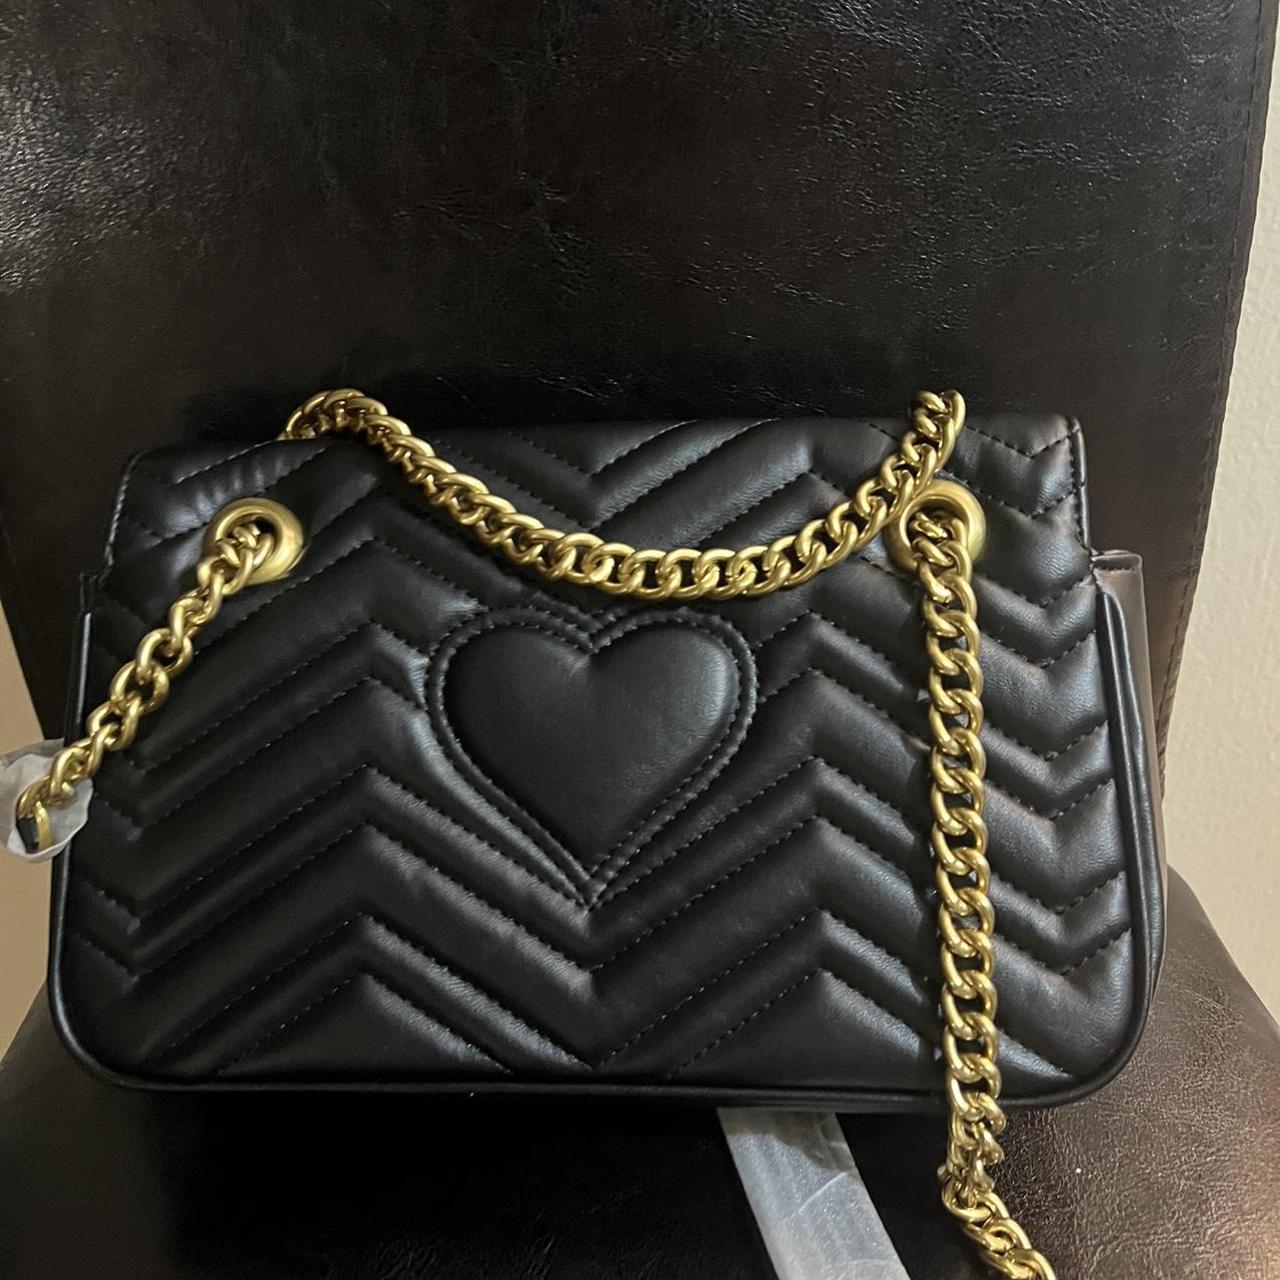 Gucci Women's Black and Gold Bag (2)